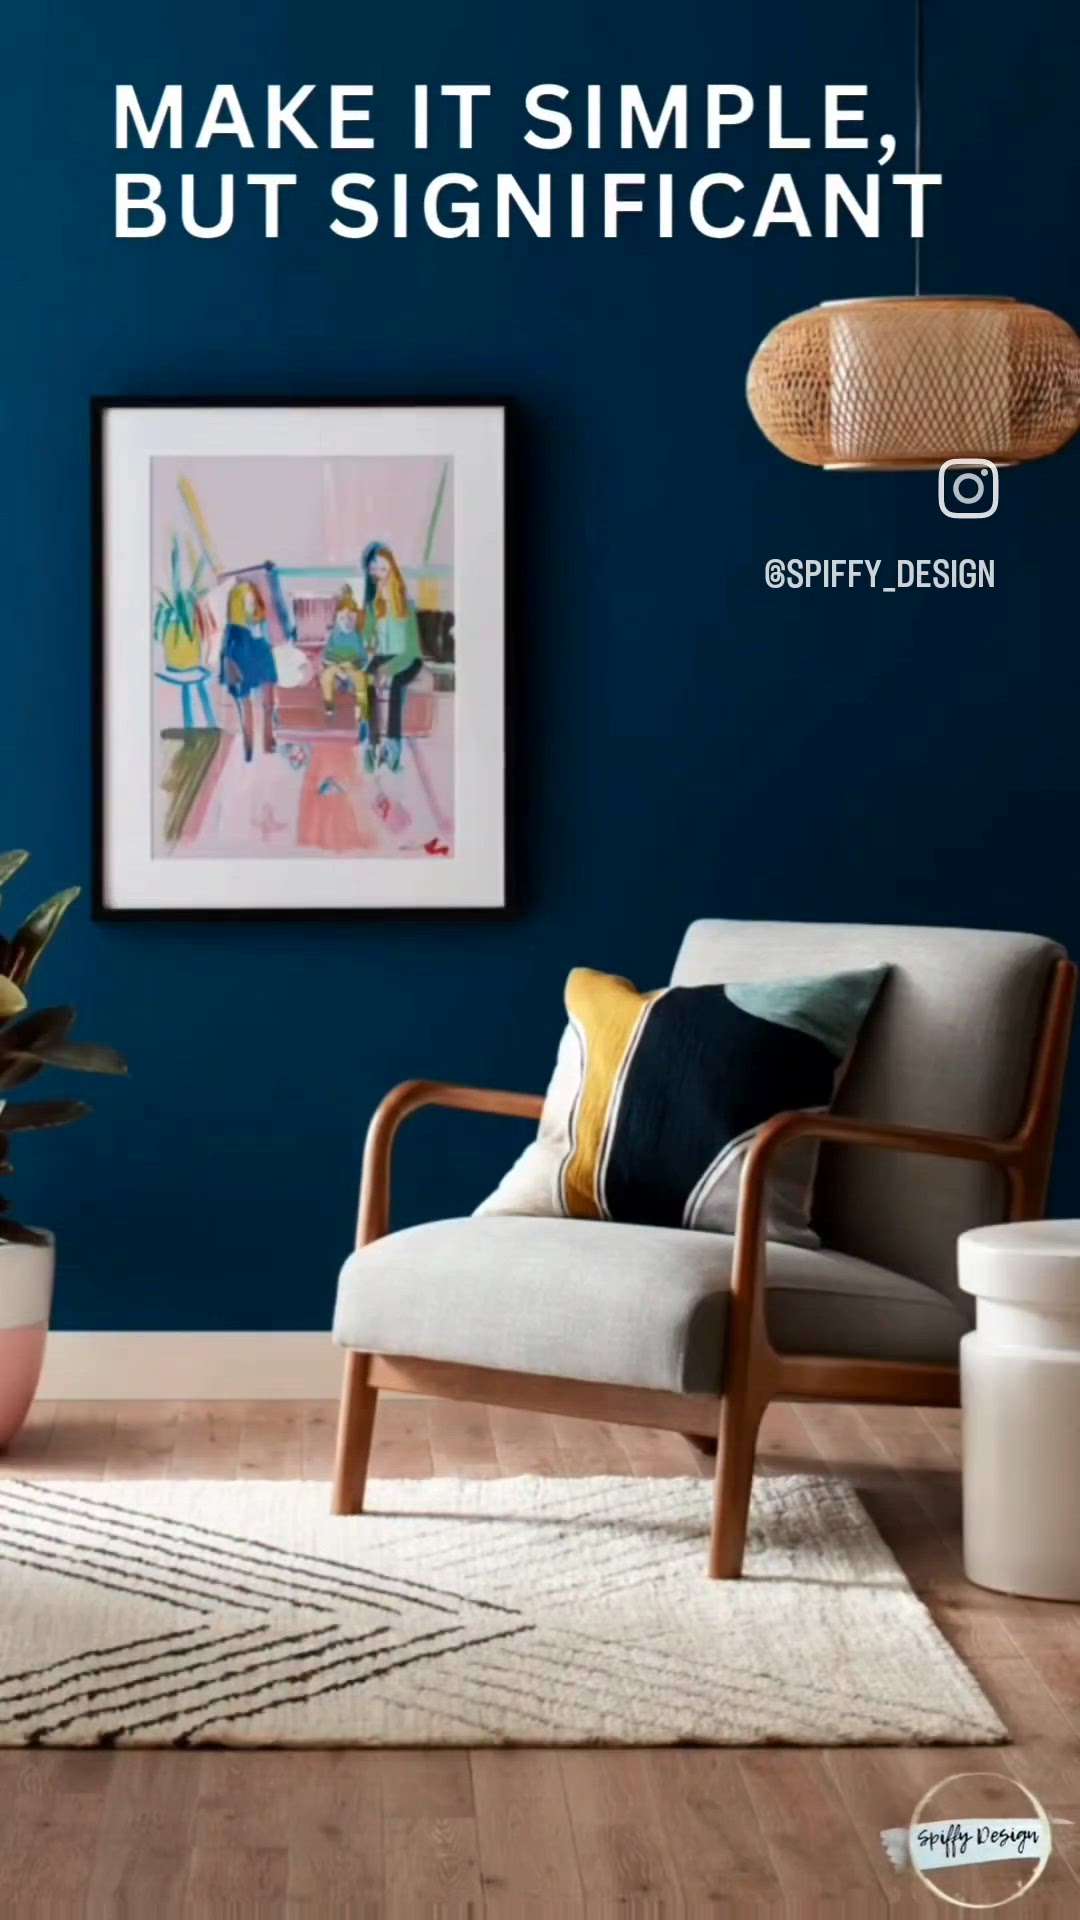 Good design is Obvious. Great design is Transparent.

What do you think? Need any ideas for the living room too? DM/Call us at 7987495448 for beautiful design ideas.
.
.
.
.
#Spiffydesign #livingroomdesign #walldecor #paints #tablelamp #livingroominspo #sidetabledecor #lightdesign #interiordecorating #interiorlove #decorativepainting #lights #decorinspo #designer #interior_and_home #interiorloversdesign #homedecor #homeinteriors #spiffylove #designinspiration #livingrugs #livingroomstyle